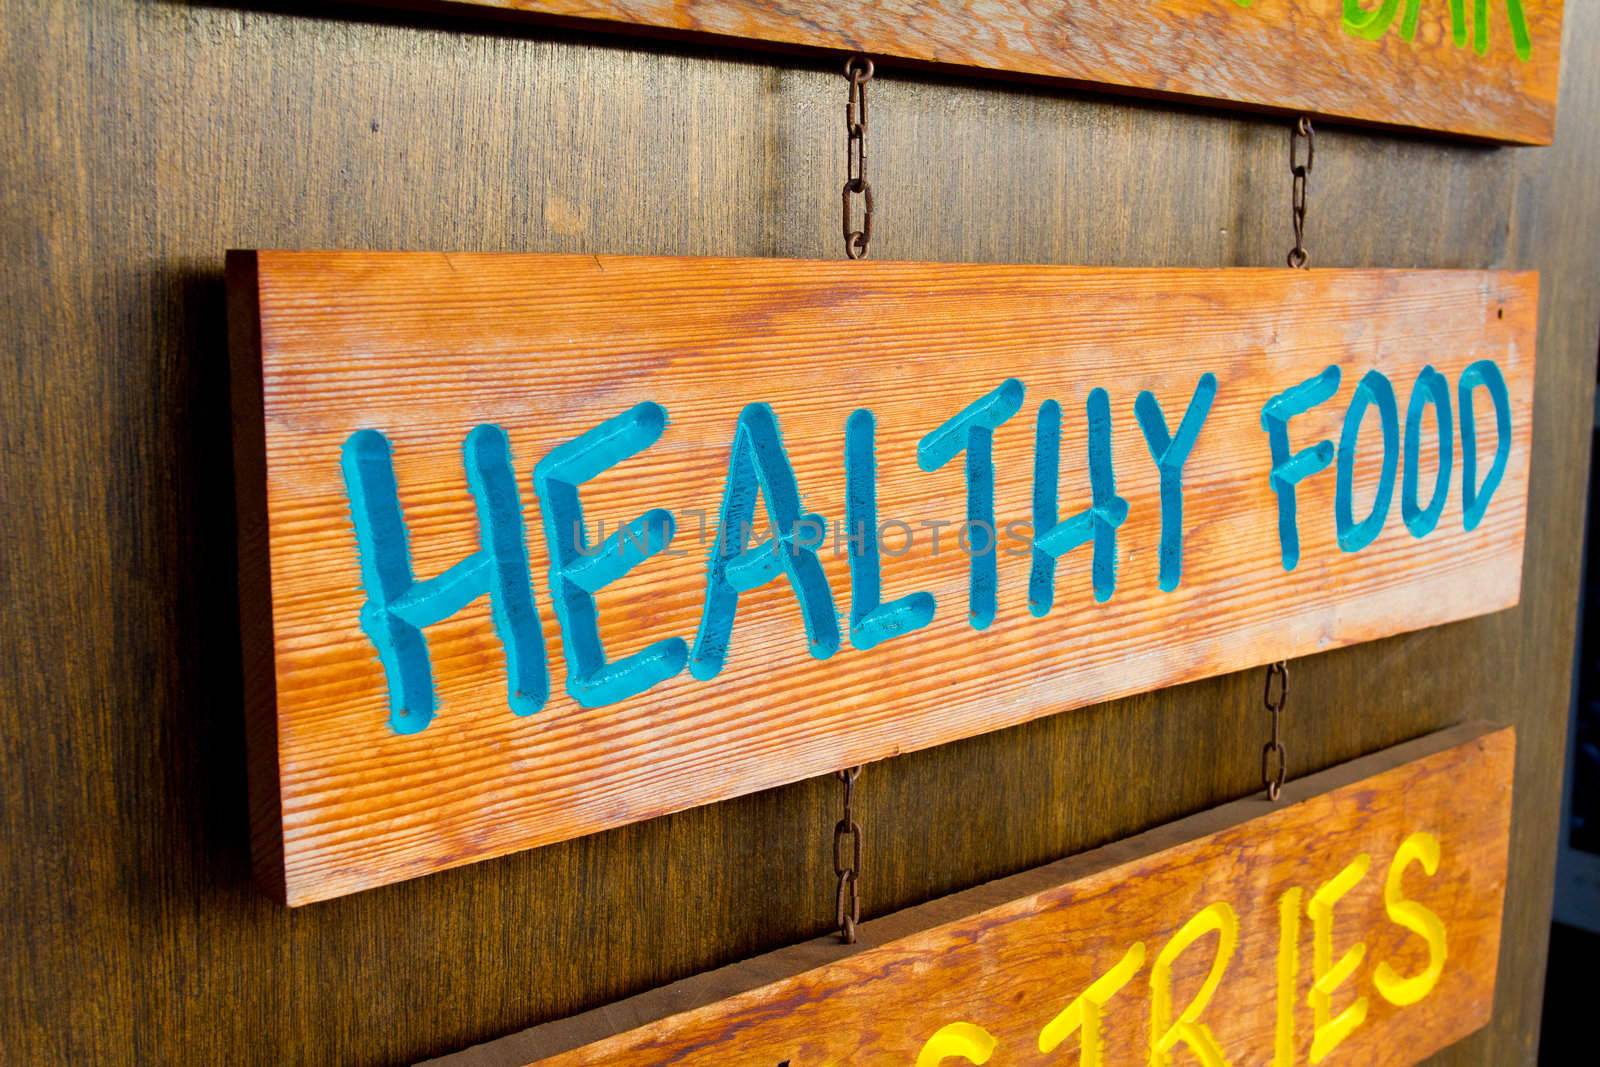 A handmade wood sign on a wood background is carved out and painted showing the words healthy food in blue letters.